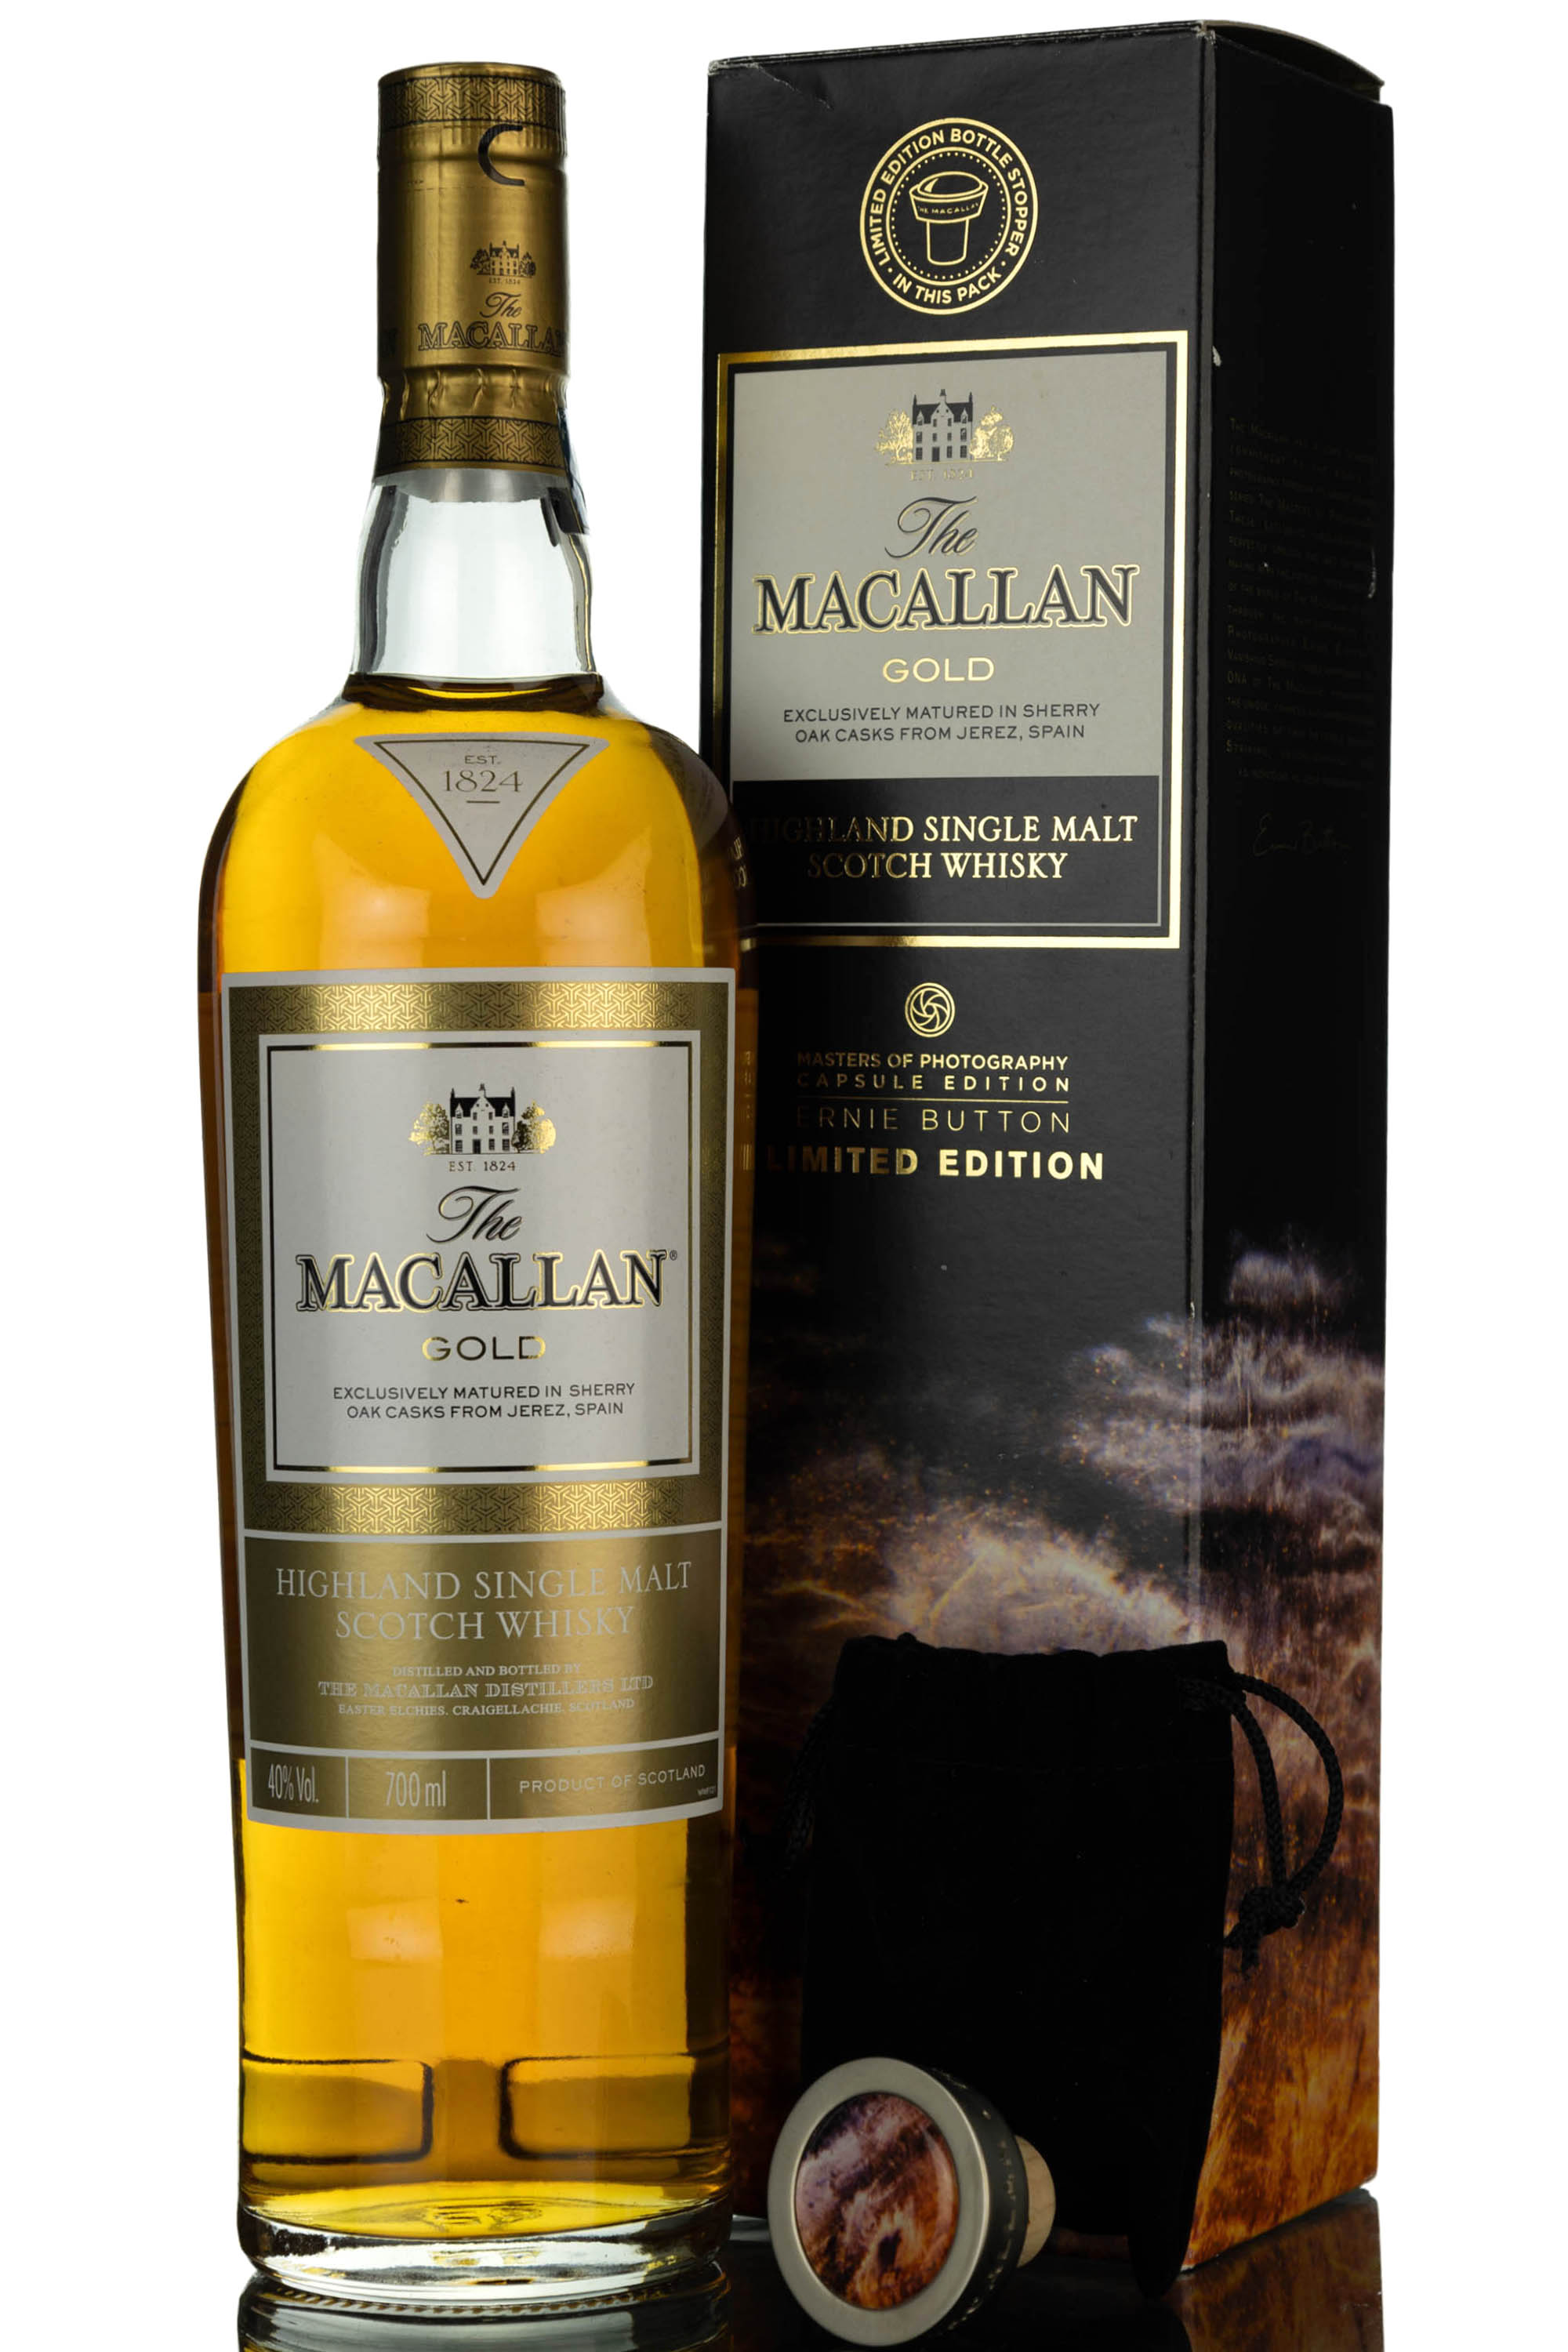 Macallan Gold - Sherry Cask - Masters of Photography Capsule Edition - Ernie Button